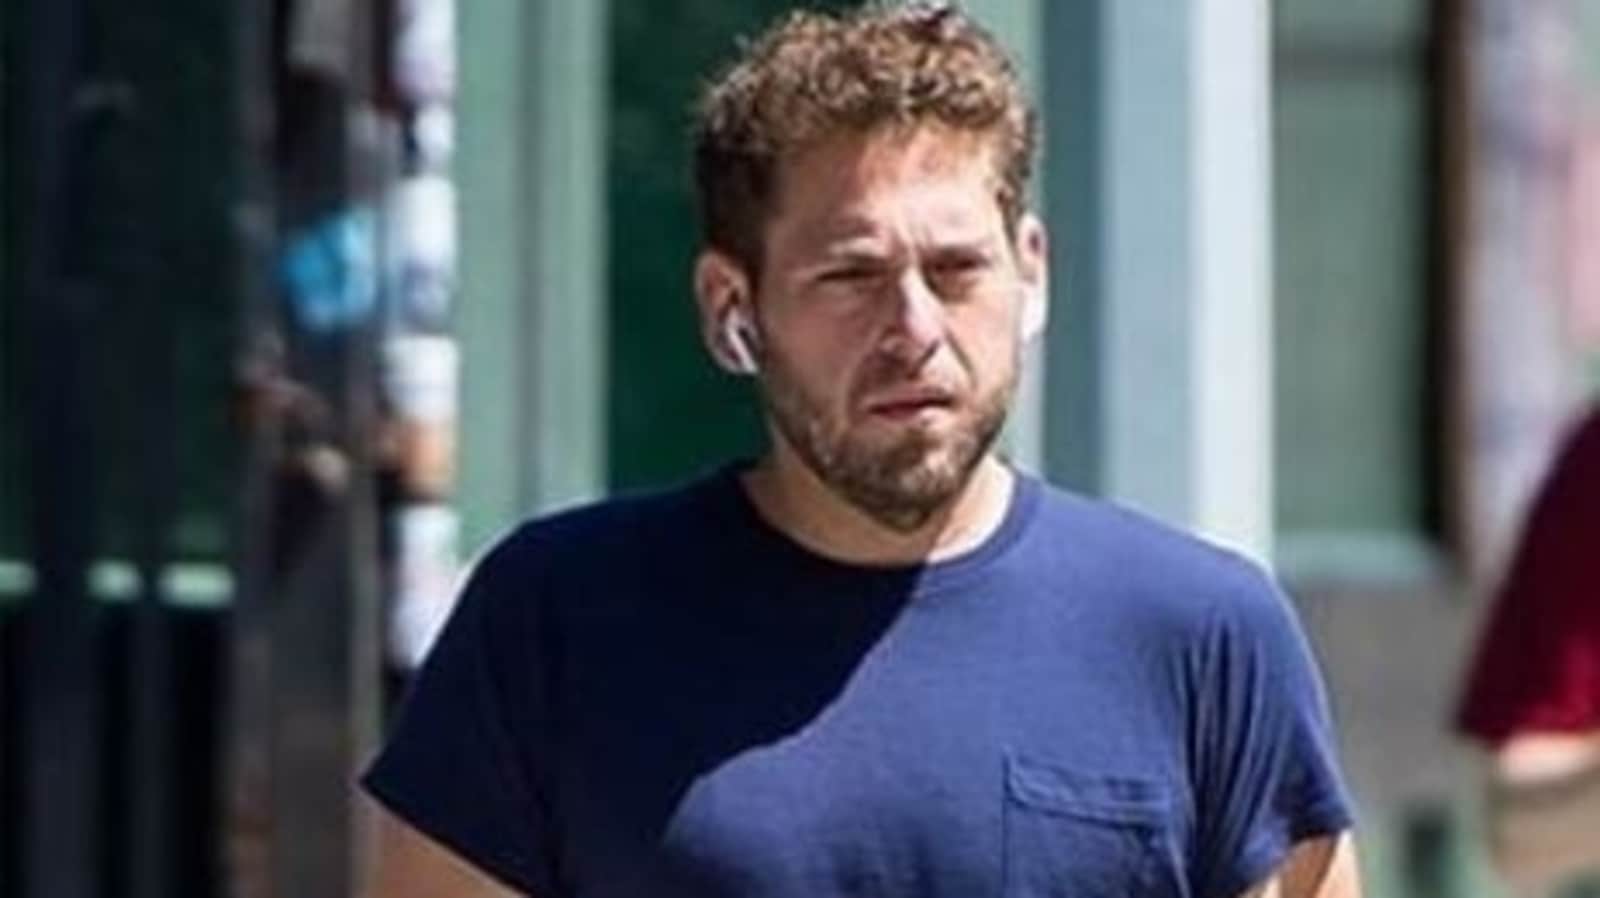 Jonah Hill says he won't promote his films after experiencing anxiety